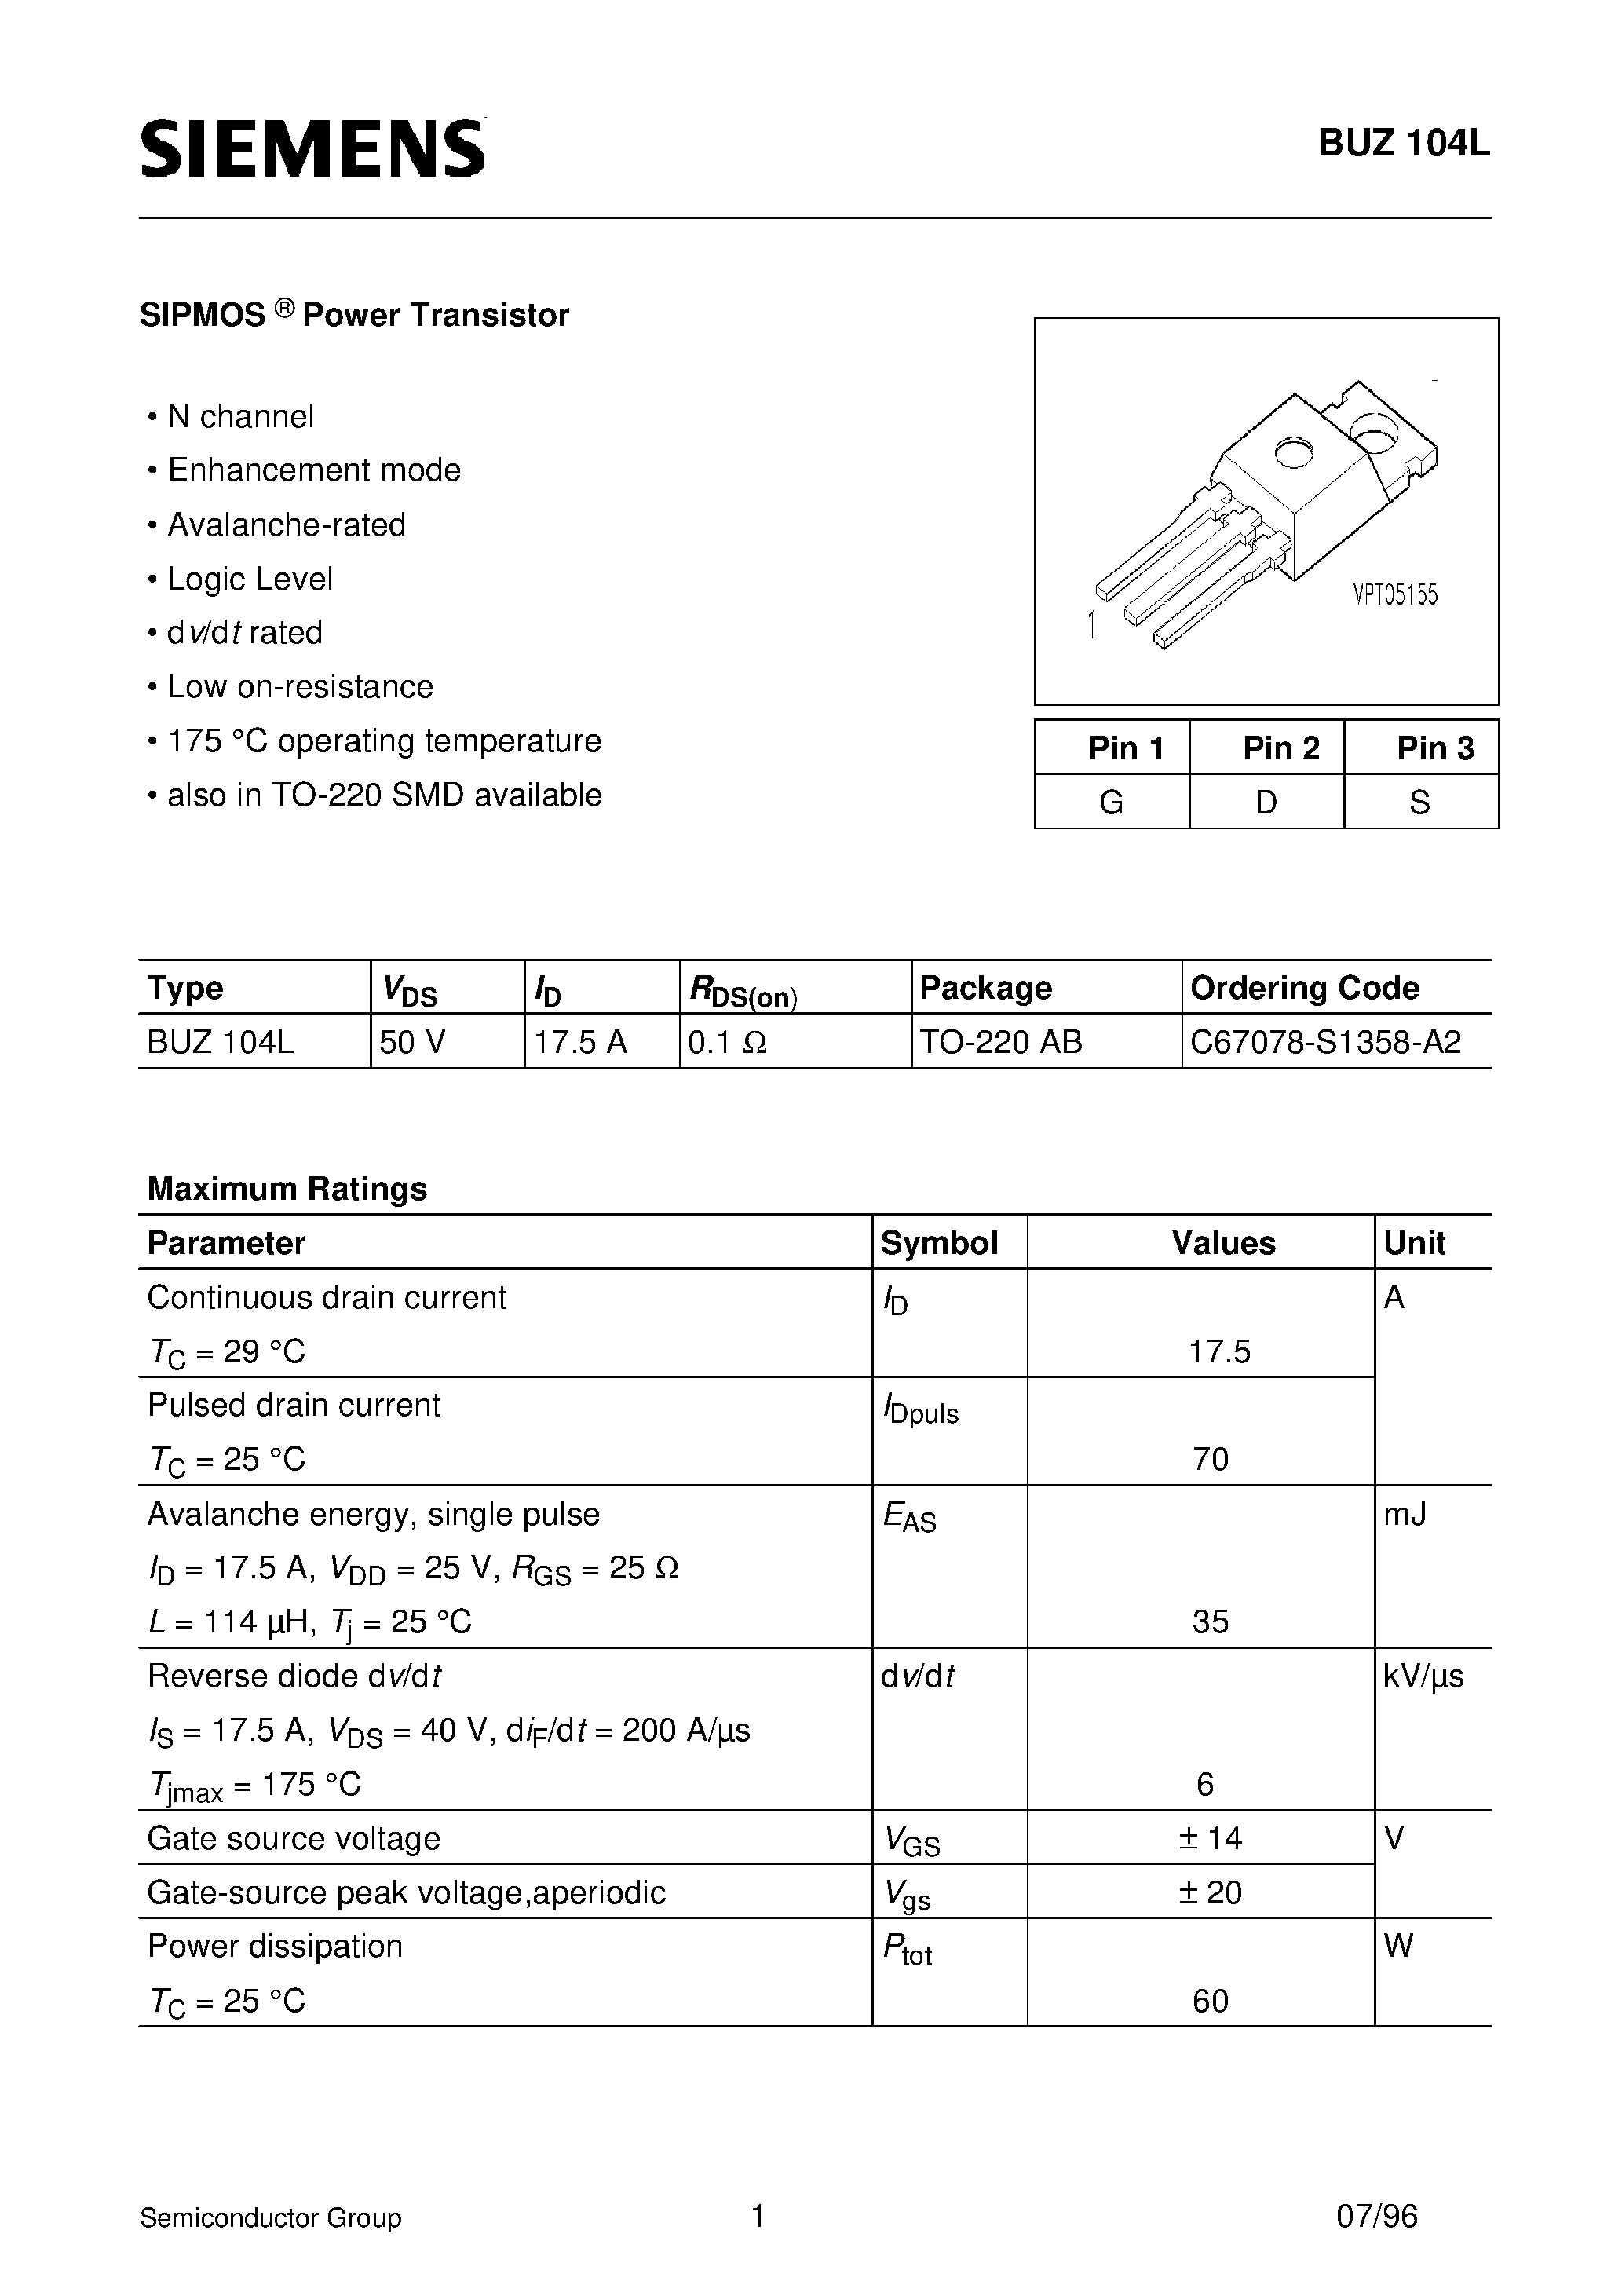 Datasheet BUZ104L - SIPMOS Power Transistor (N channel Enhancement mode Avalanche-rated Logic Level d v/d t rated Low on-resistance) page 1